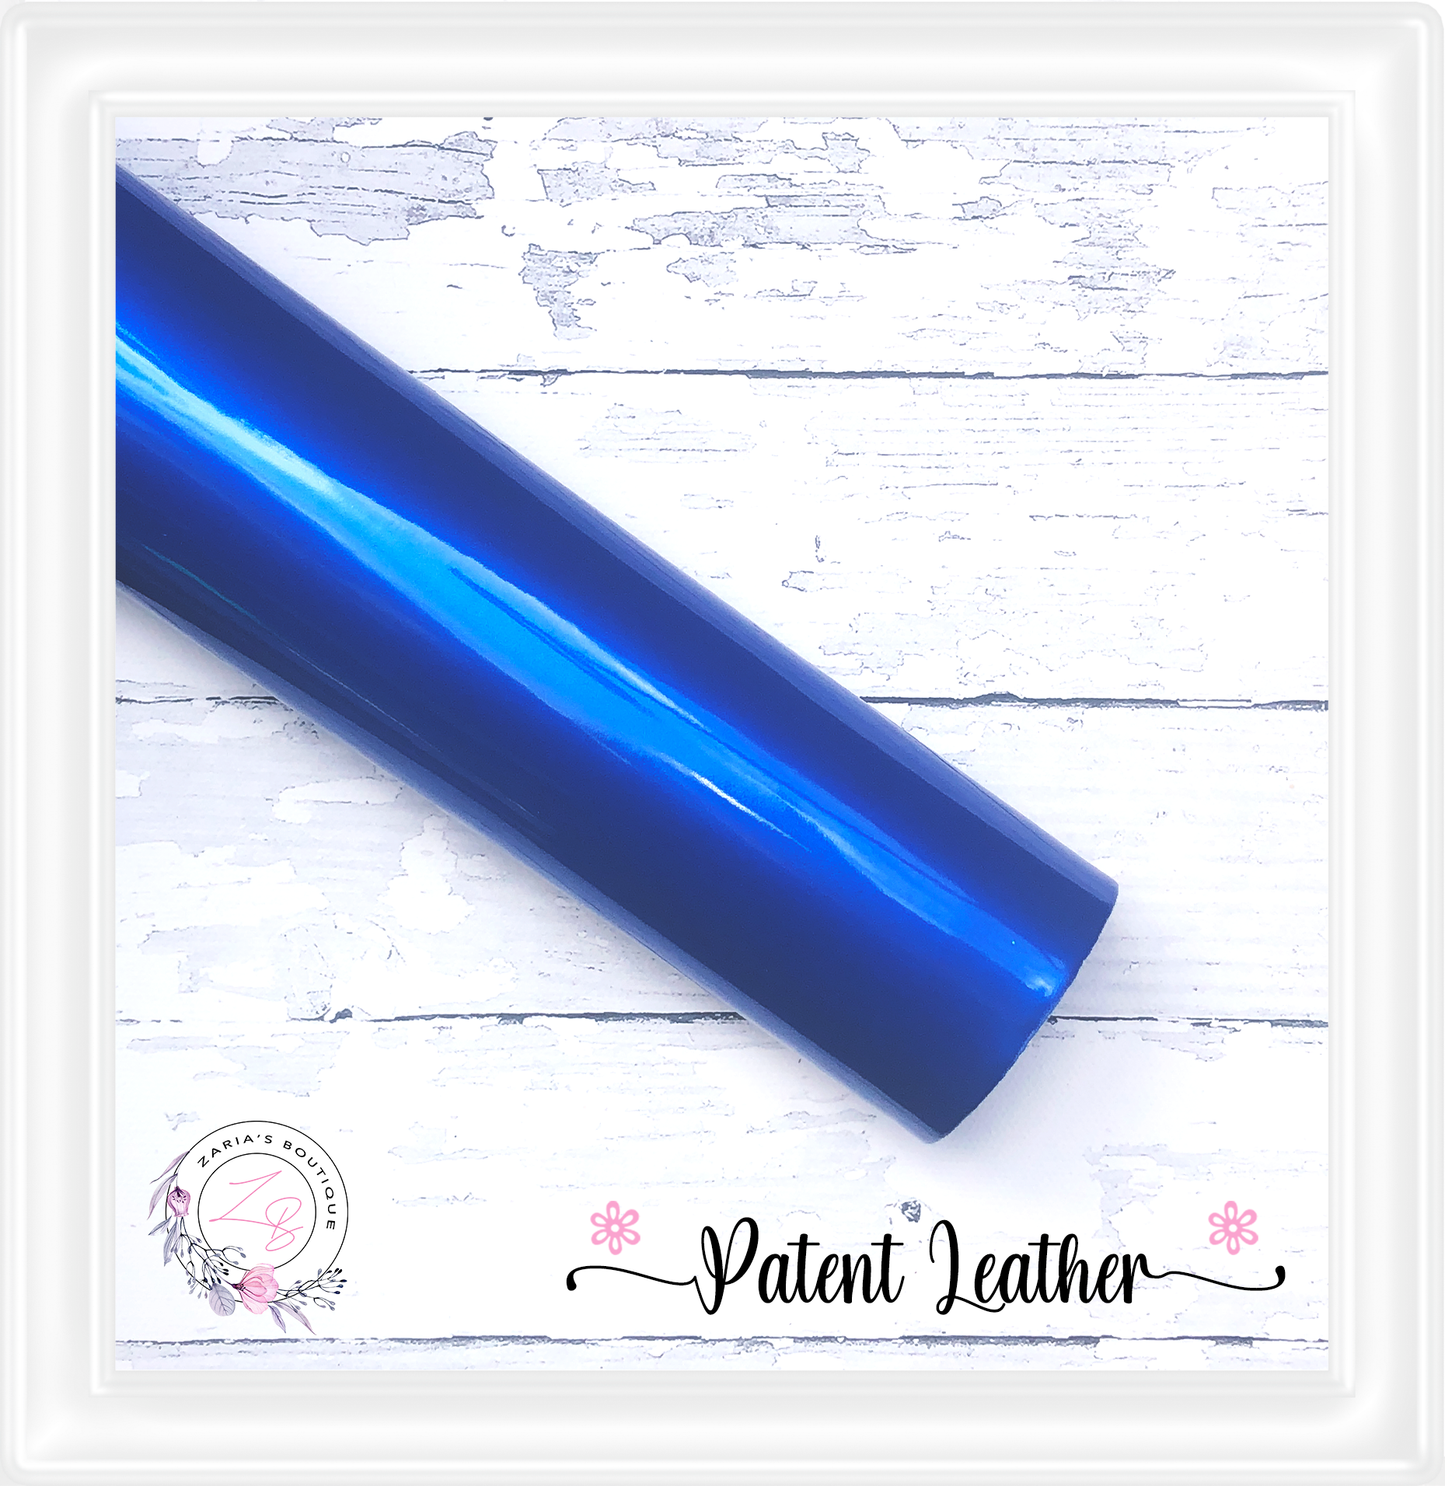 ⋅ Patent Leather ⋅ Smooth & Glossy Vegan PU Leatherette ⋅ Royal Blue  ⋅